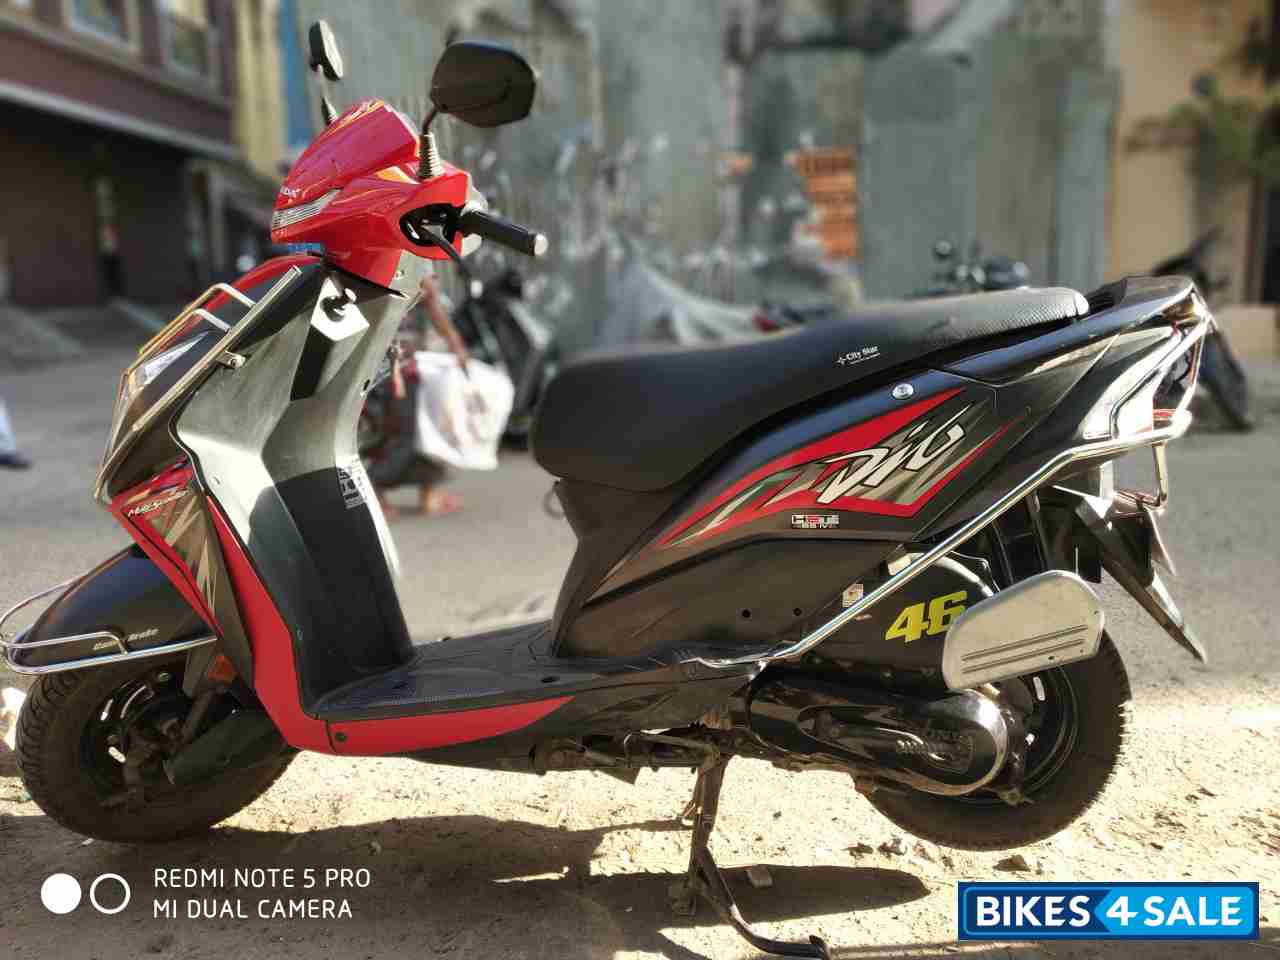 Used 18 Model Honda Dio For Sale In Chennai Id Red Colour Bikes4sale